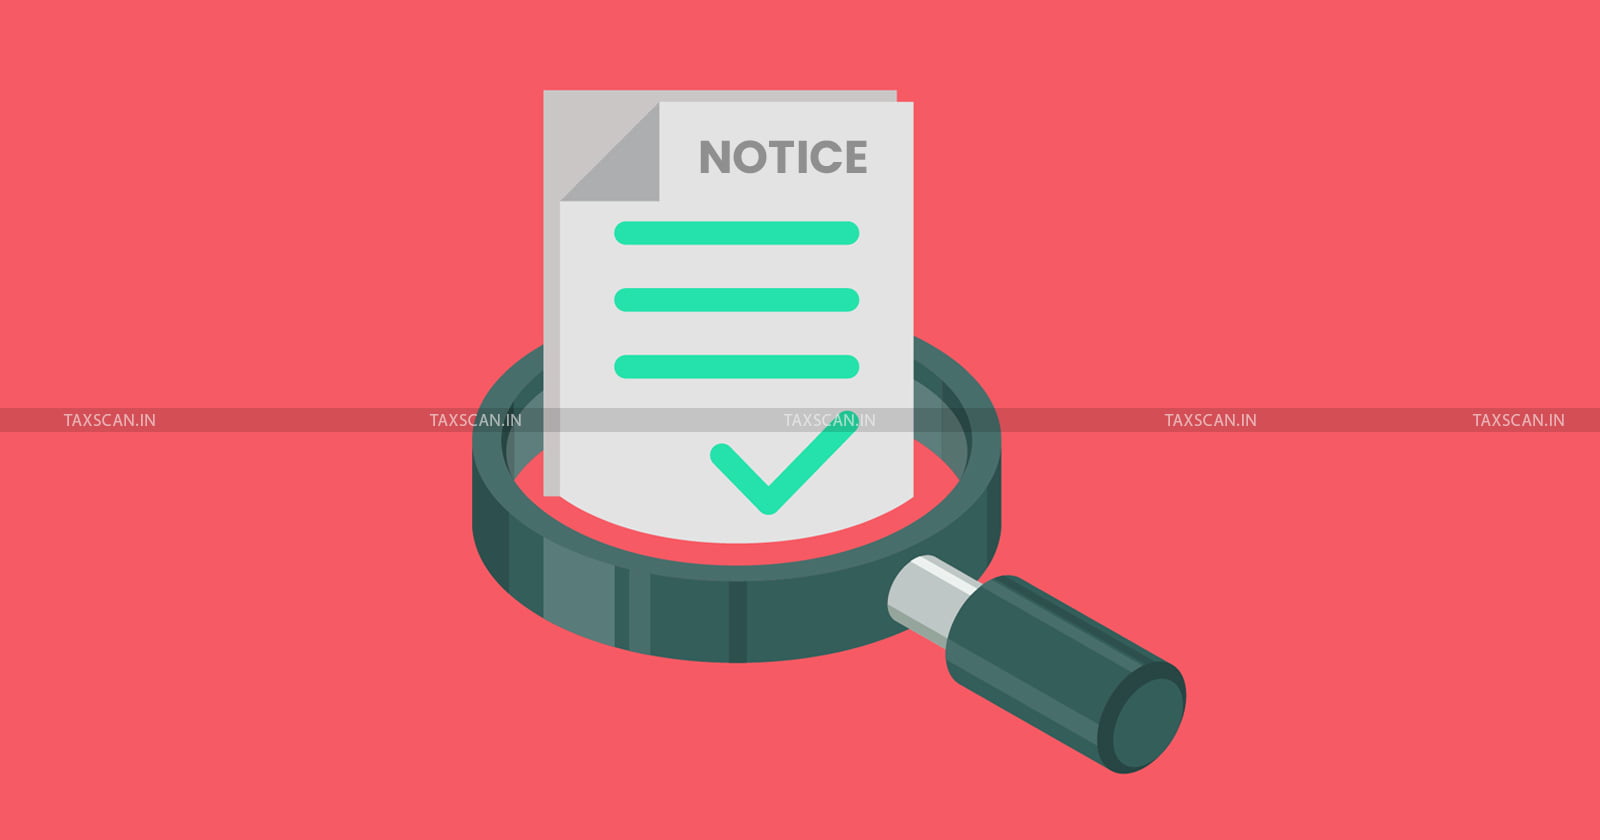 Time-barred Re-Assessment Proceedings - Time-barred Re-Assessment - Re-Assessment Proceedings - Re-Assessment - Delhi High Court - Delhi HC issues notice for Re-examination - Delhi HC issues notice - Re-examination - Taxscan